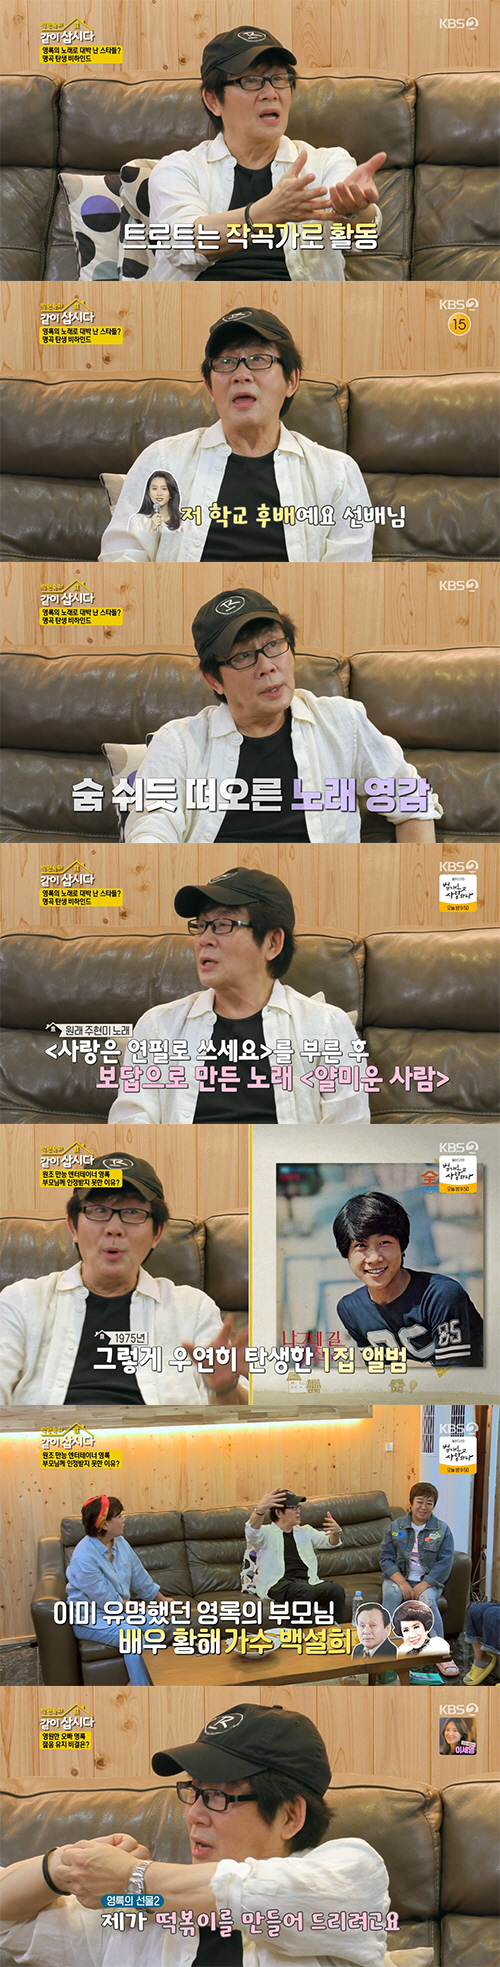 Singer Jeon Yeong-Rok opens up about Inscription with Actor Lee Kyung Jin after 40 yearsOn the 27th KBS2 entertainment program Park Won-sooks Lets Live together, Jeon Yeong-Rok visited Okcheon House with the invitation of Hye Eun Yi.Kim Chung had been calling her sisters in a loud voice since morning, and Kim Chung had ordered a huge amount of courier service to open an indoor stall.Its really good, my boyfriend is coming, said Hye Eun Yi, who laughed, saying, I think Cheongi thought it was my boyfriend today and ordered it.Lee Kyung Jin saw the kettle and saw the kettle go on the spot, saying, The kettle should be a little crushed.The sisters tried to complete the spore wagon by joining together, but they showed a clumsy appearance, and Kim Chung laughed with a positive appearance saying, Lets just do it.Park Won-sook wondered about the identity of Hye Eun Yis boyfriend, and Lee Kyung Jin asked, Singer?Hye Eun Yi said, Then would you like to be a Singer Actor? But Park Won-sook laughed, referring to Hye Eun Yis ex-husband, saying, No, I lived with Actor.The one who came to the sisters was the 80s aid idol Singer Jeon Yeong-Rok.Jeon Yeong-Rok, who entered the house, quipped, Is this broadcasting now, its so natural that I dont know if its broadcasting.Kim Chung asked, Has Jeon Yeong-Rok ever worked with Lee Kyung Jin? And Jeon Yeong-Rok surprised the sisters by answering, We were in the process of inscription.Lee Kyung Jin said, We have never met personally, and Jeon Yeong-Rok said, I met once at the station Car Parking.After that, Jeon Yeong-Rok and Lee Kyung Jin said, We just came out of Car Parking.Jeon Yeong-Rok surprised the sisters by saying Write love in pencil also had the original owner.It turned out that this song was Joo Hyun-mis song, but Jeon Yeong-Rok visited the composer and asked for a song, and said, I will sing it hard.When there was no actual Fan club, Kim Chung informed him that he was surprised to see Jeon Yeong-Roks Fan club, and Jeon Yeong-Rok said, It was the beginning of fandom.When I handed the demo tape to Fan club, my fans followed me, and other singers followed me. Jeon Yeong-Rok also said, I did all the genre except trot, but trot only presents songs.Hye Eun Yi said, Hit the jackpot! for giving Kim Hee-ae a song, and Jeon Yeong-Rok said, Kim Hee-ae is a junior at School.I gave him a song because he said, You know, youre a senior.Jeon Yeong-Rok said, Yoo Hyeon-sang also said, Give me a song to my student. So I asked who it was, and it was Lee Ji-yeon.So I gave Wind Stop and I was in the top spot for five consecutive weeks. In addition, Jeon Yeong-Rok unearthed the Yang Soo-kyung and released a story that presented Love is like rainwater outside the window.Jeon Yeong-Rok then surprised everyone once again by saying that he made a sorry person known as Kim Ji-aes song to give Joo Hyun-mi to repay Write love in pencil.I made my debut as an actor, said Jeon Yeong-Rok.But I did a song at the time, but I contacted the record company and made an album. My father and mothers halo had been crushing me.So I tried to do anything, he said, referring to Actor Yellow Sea, the father of Jeon Yeong-Rok, and his mother Singer Baek Sul-hee.Park Won-sook asked, What do you want to eat today? and Jeon Yeong-Rok applauded the sisters, saying, Im going to sing 7080 songs and make Tteok-bokki.Jeon Yeong-Rok started making Tteok-bokki with his best friend Hye Eun Yi but was seen tumbling and laughed.The two were not intent on making Tteok-bokki, and Kim Chung and Lee Kyung Jin were installing indoor tanks in the yard.Sisters who tasted the Tteok-bokki of Jeon Yeong-Rok were praised as really delicious.Lee Kyung Jin wondered about the recipe and laughed, saying, I will make it a shochu snack.While eating Tteok-bokki, Jeon Yeong-Rok said of cancer rumors, I was a middle school student with Lee Hong-ryul, but I went to colonoscopy with him and found a polyp.The doctor said, This is cancer. Later, I went to the broadcast with Lee Hong-ryul and talked about it. In the middle, Lee Hong-ryuls words made me edit and eventually rumored that cancer was circulating.So I sucked my fingers, he said, laughing.Jeon Yeong-Rok, who visited the so-called Pocheong carriage, showed the first stall in life and showed an emotional concert that can not be seen anywhere in the autumn night.Jeon Yeong-Rok presented the application song as well as a 50-year-old Jigi Hye Eun Yi and a fantasy duet performance that was not easily seen.